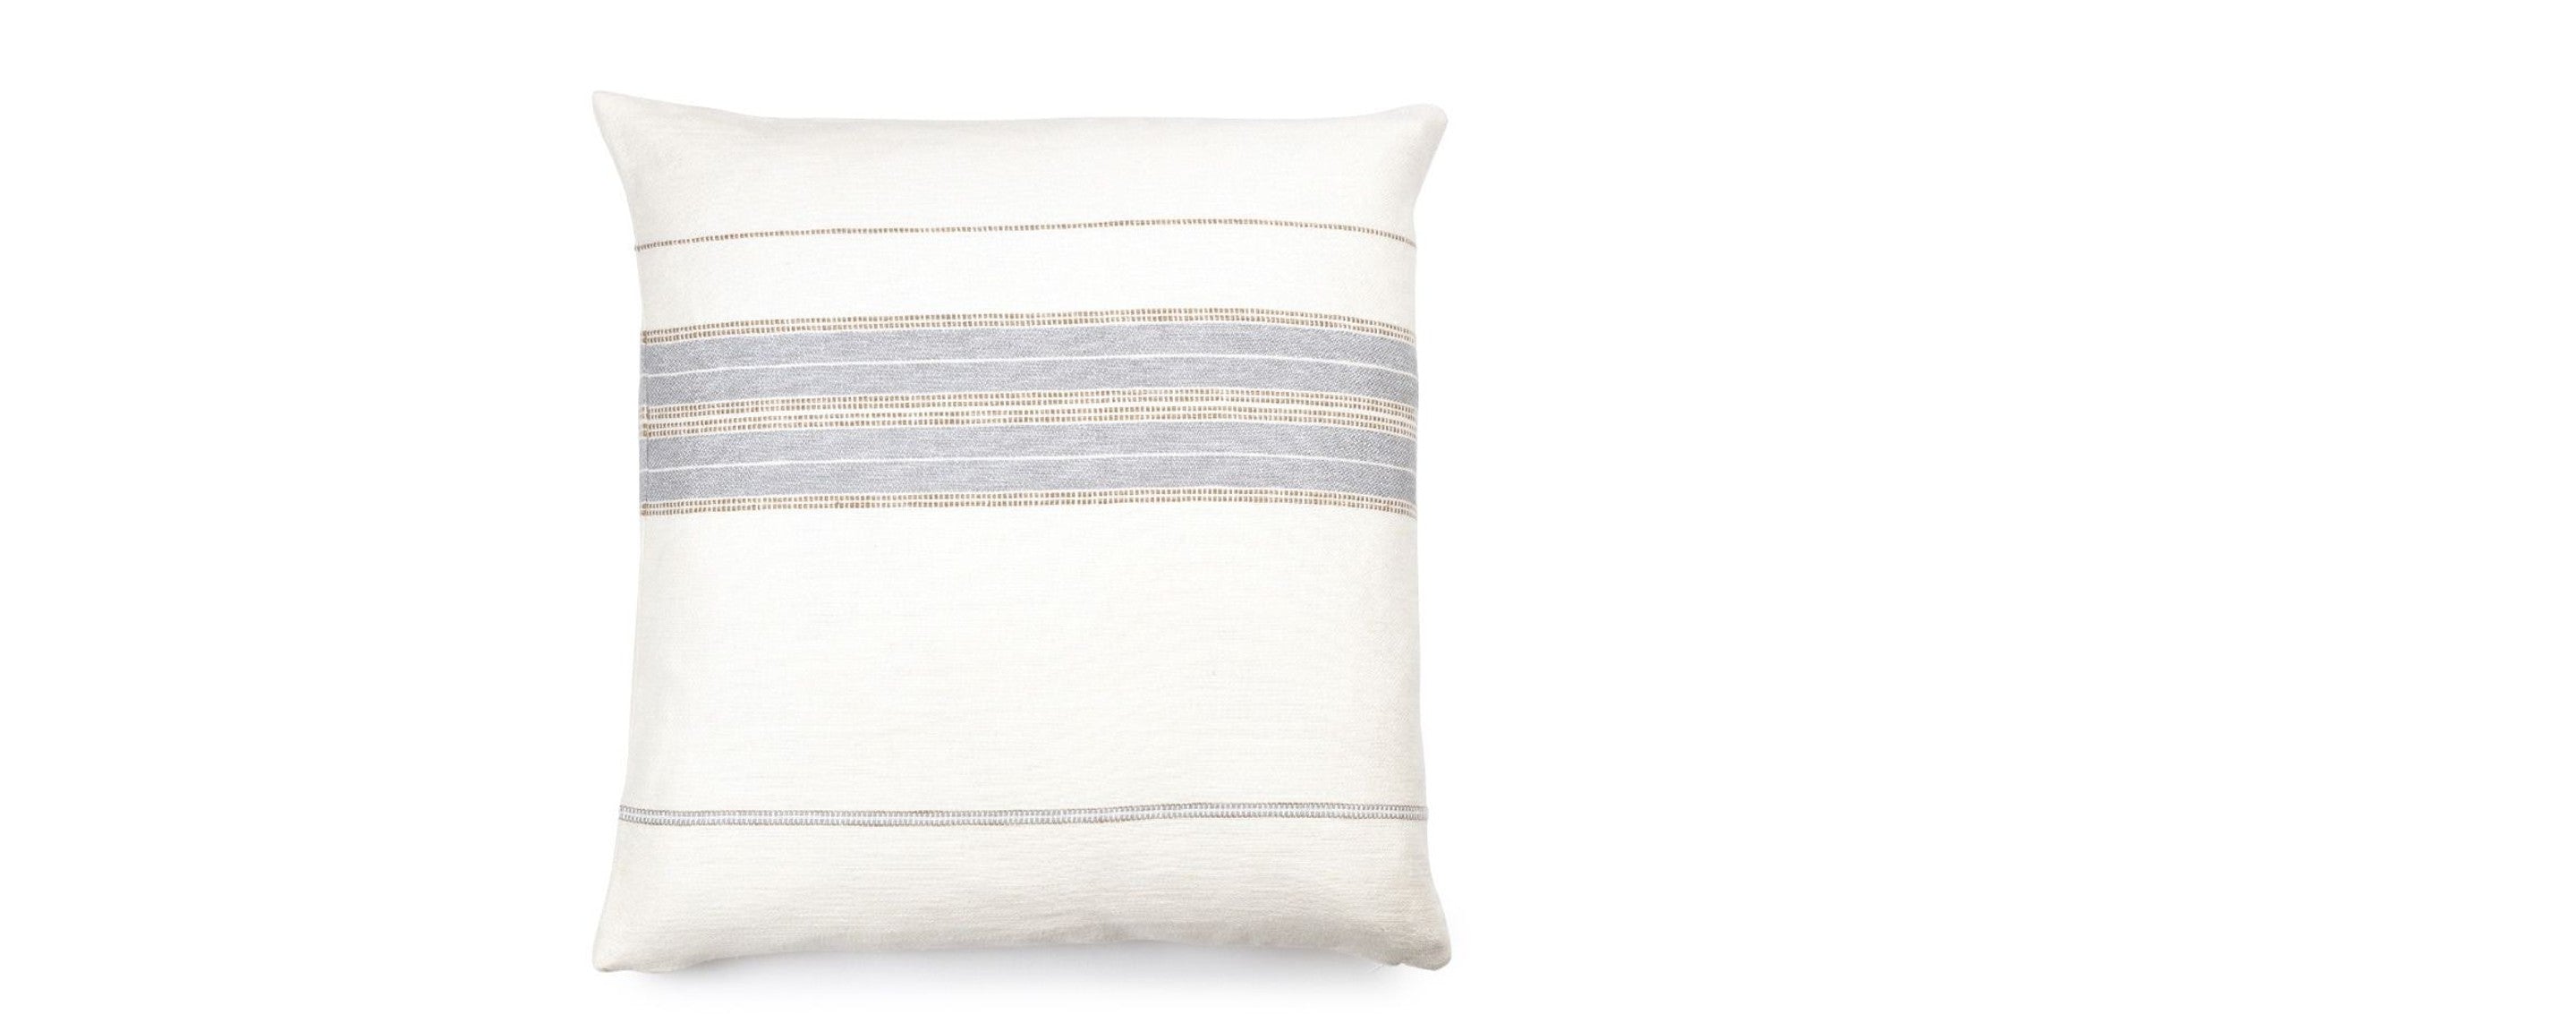 propriano pillow collection